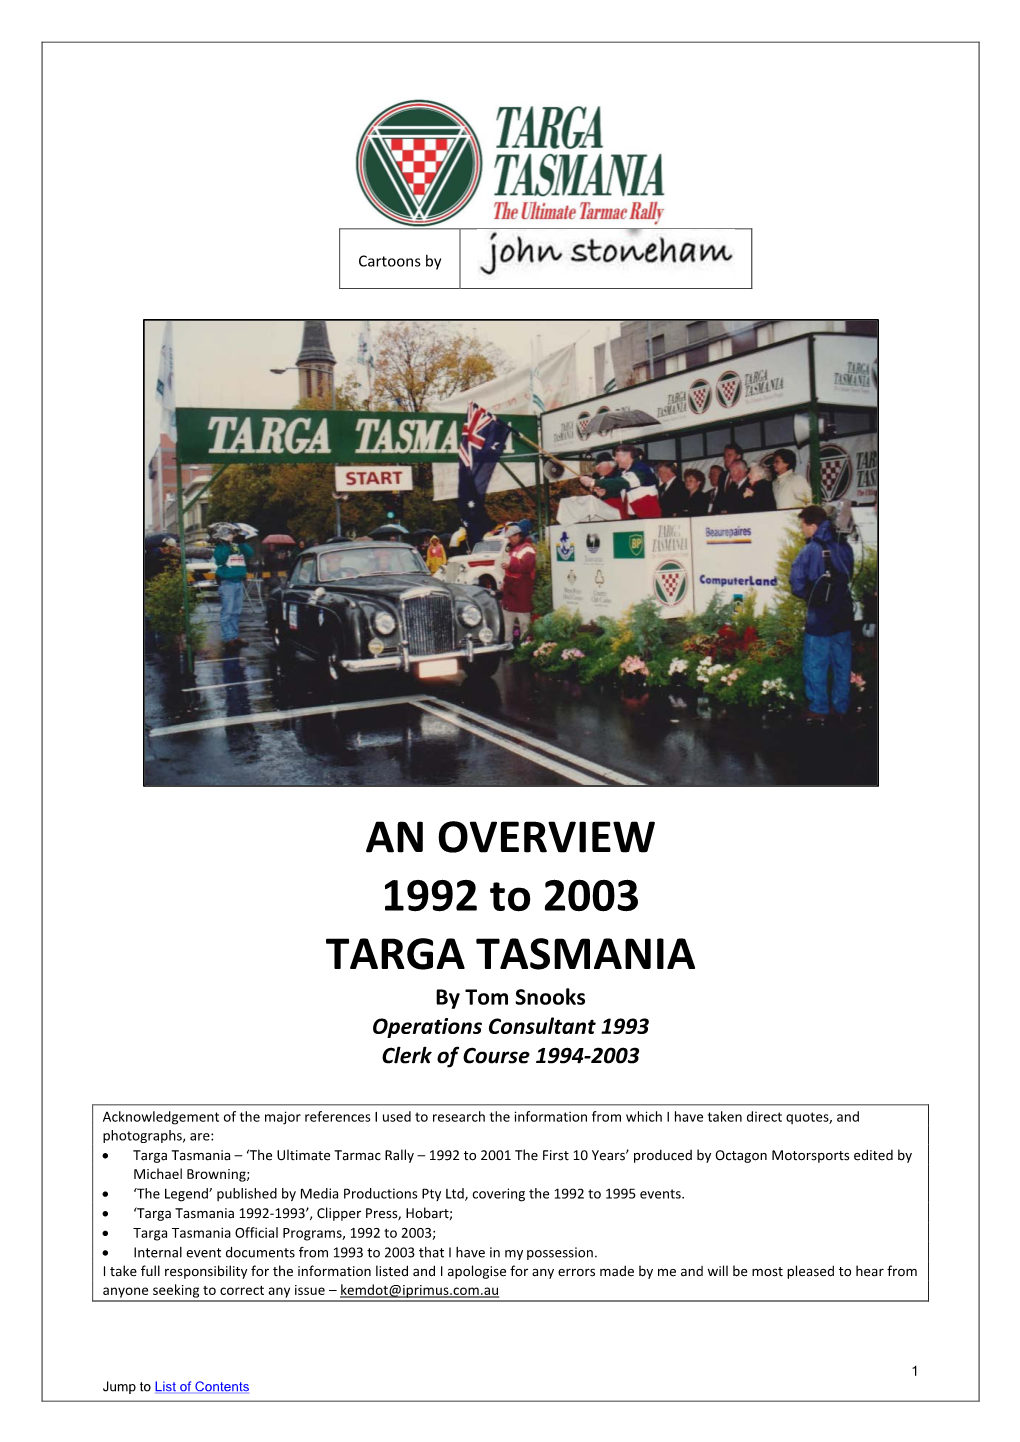 AN OVERVIEW 1992 to 2003 TARGA TASMANIA by Tom Snooks Operations Consultant 1993 Clerk of Course 1994-2003